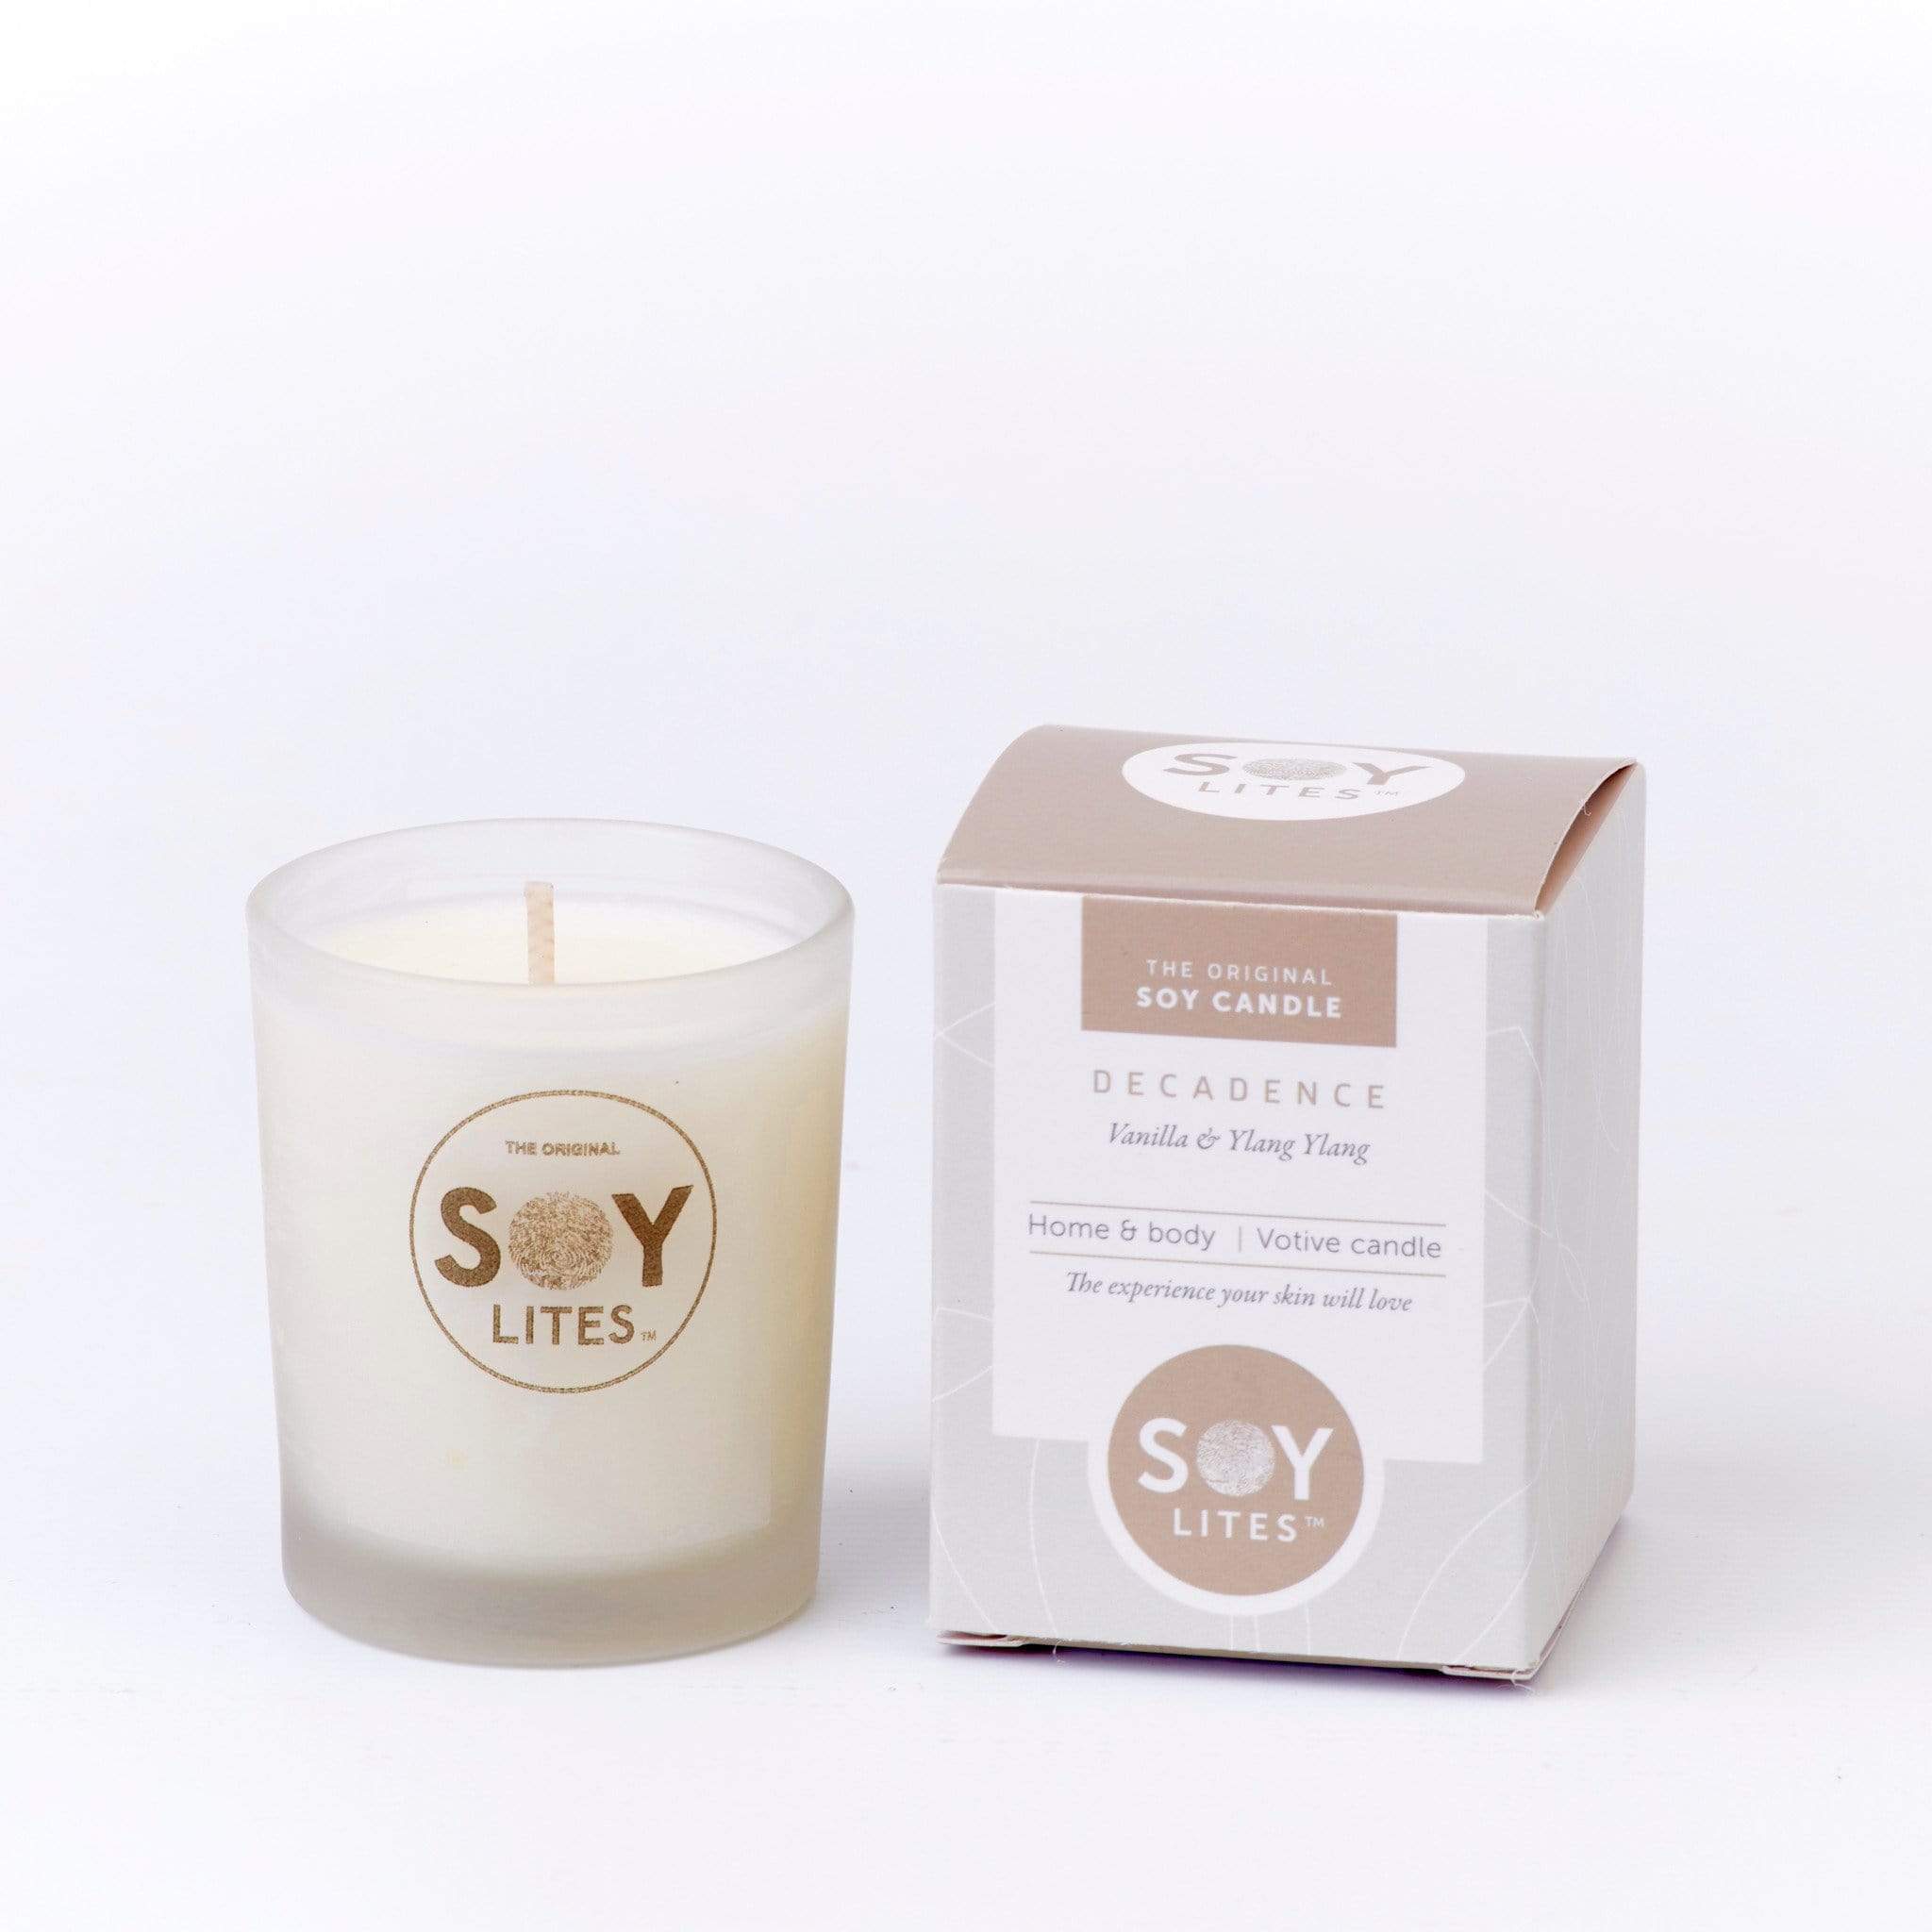 SoyLites Soy Candle Decadence Votive Candle 2